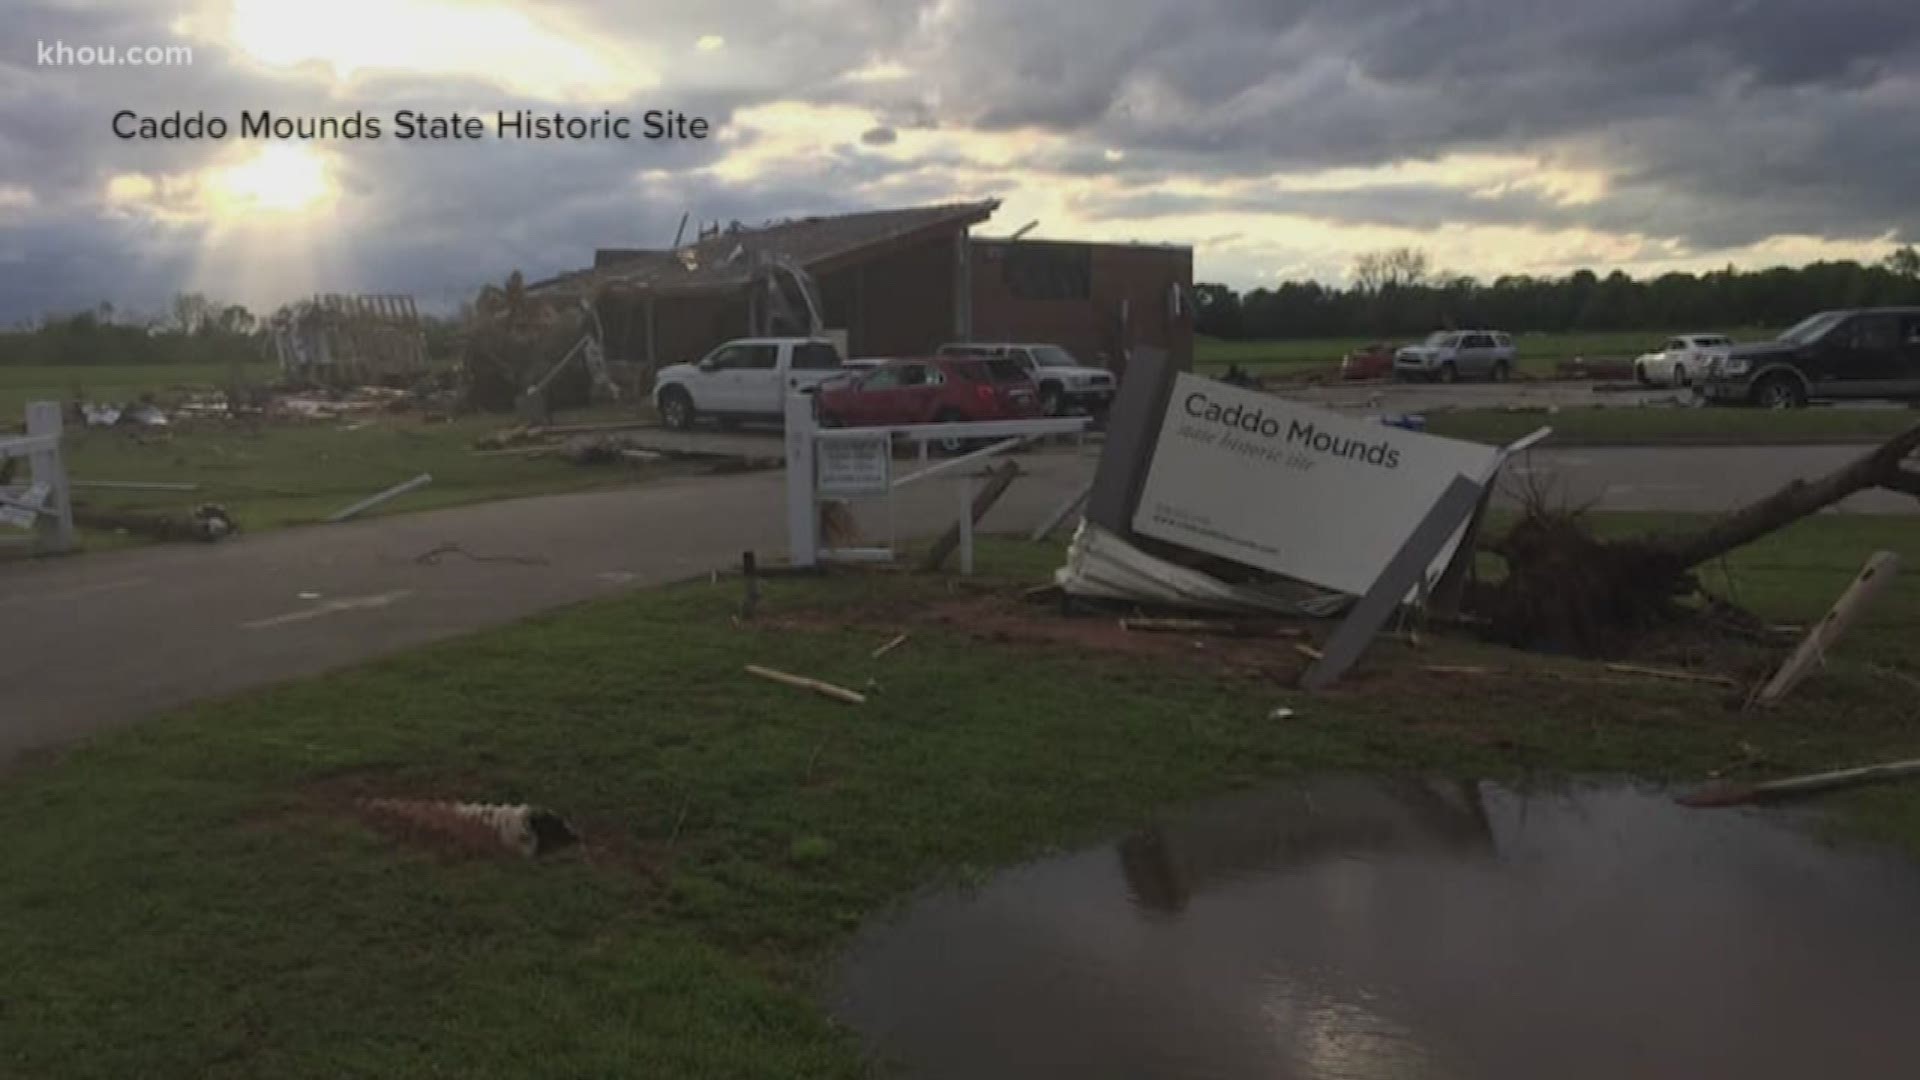 Two children, ages 3 and 8, died in Angelina County after devastating storm damage in east Texas. One person died in Houston County and a woman was killed at Caddo Mounds State Historic Site.